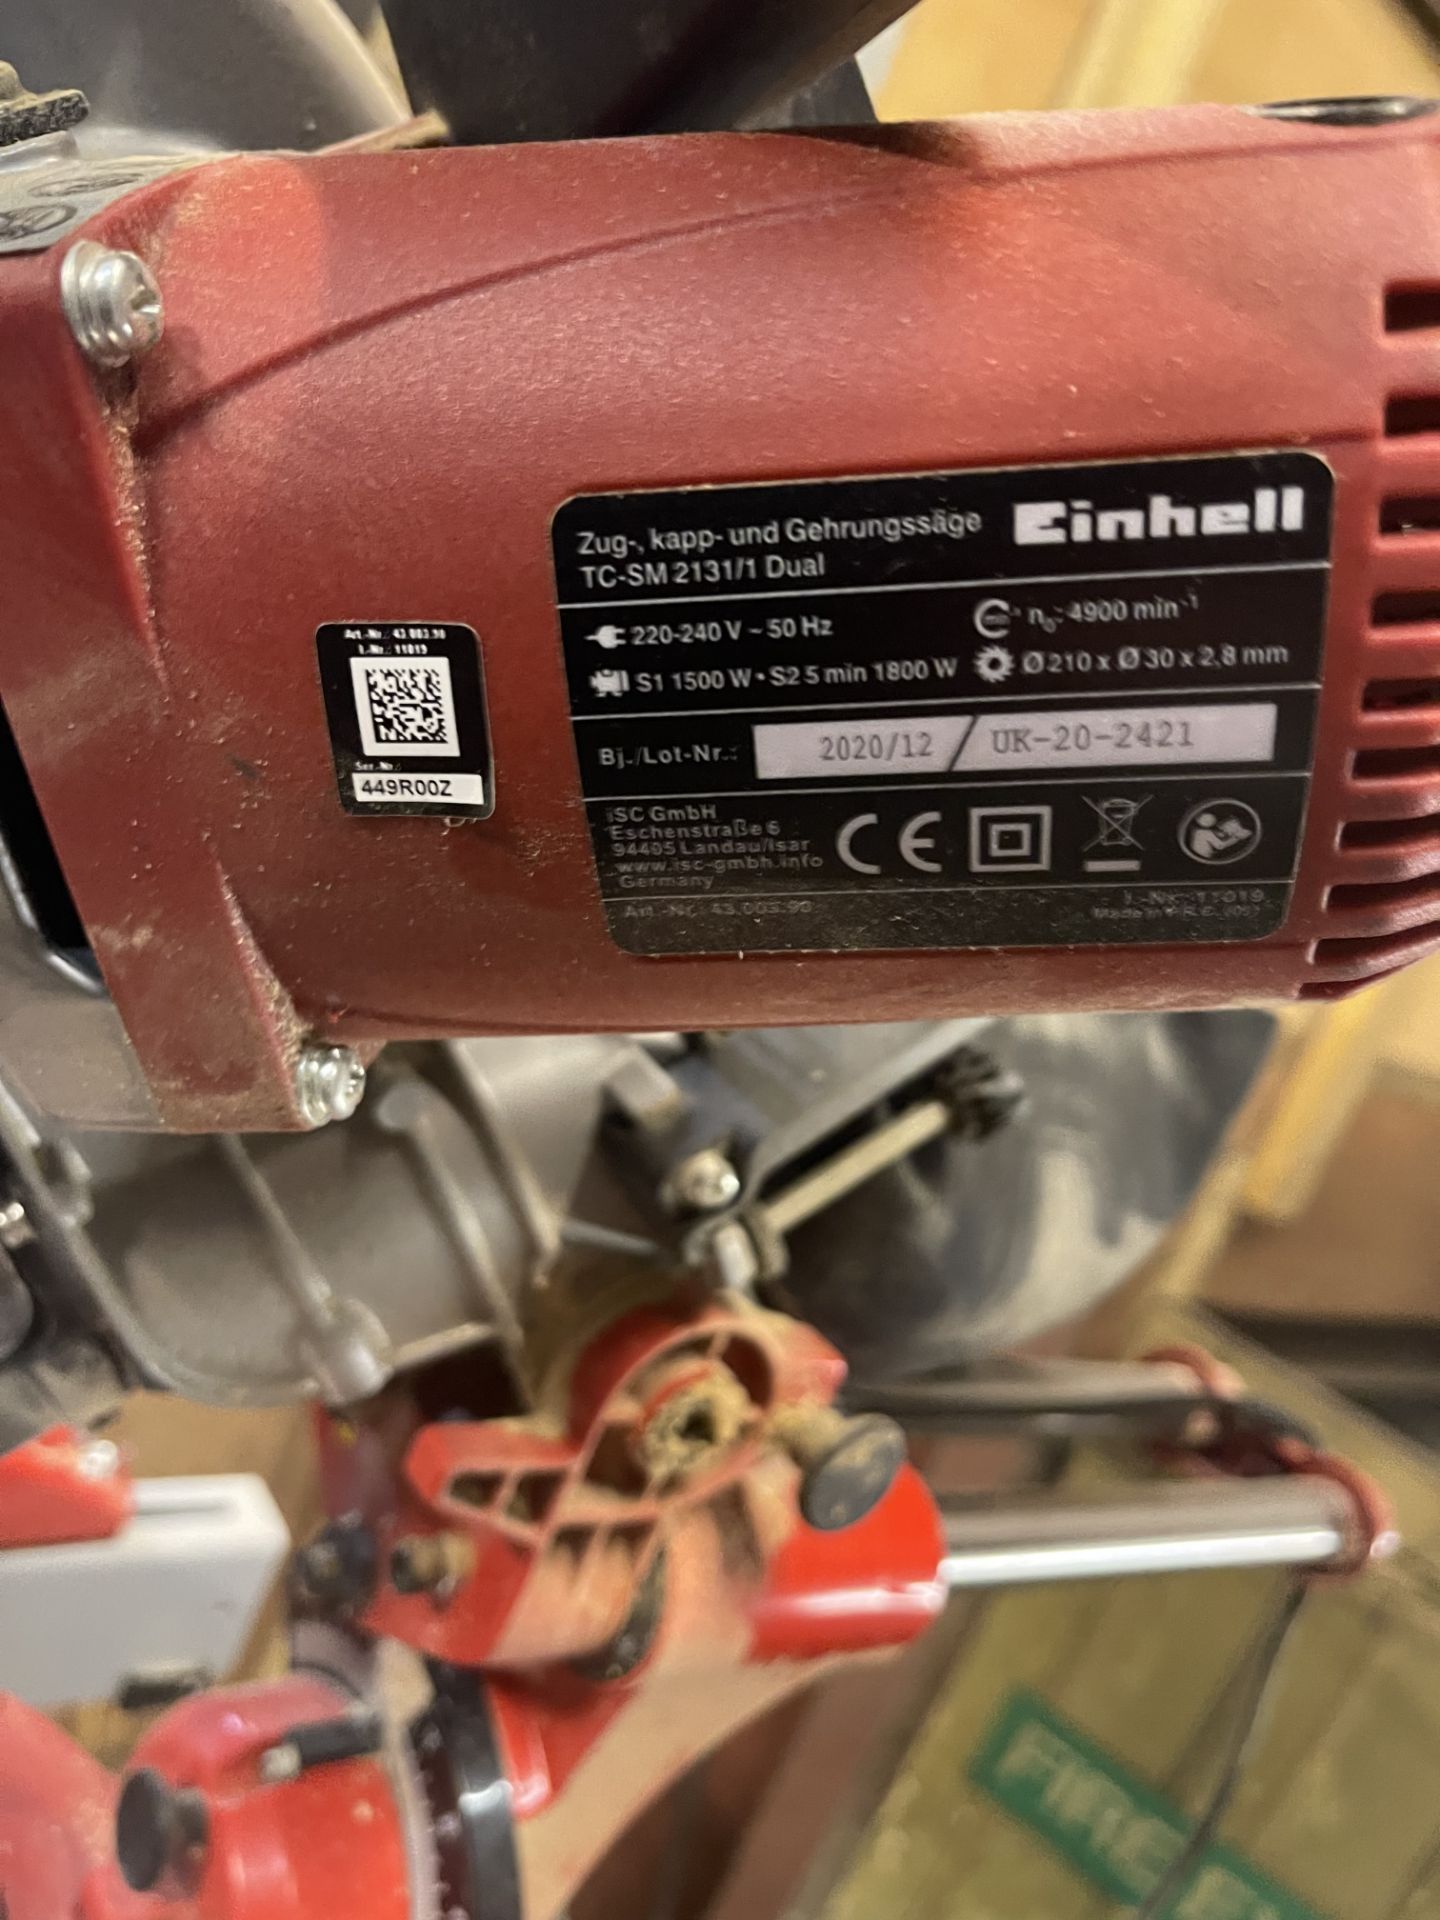 Einhell TC-SM2131/1 240v COMPOUND MITRE SAW with stand - Image 2 of 2